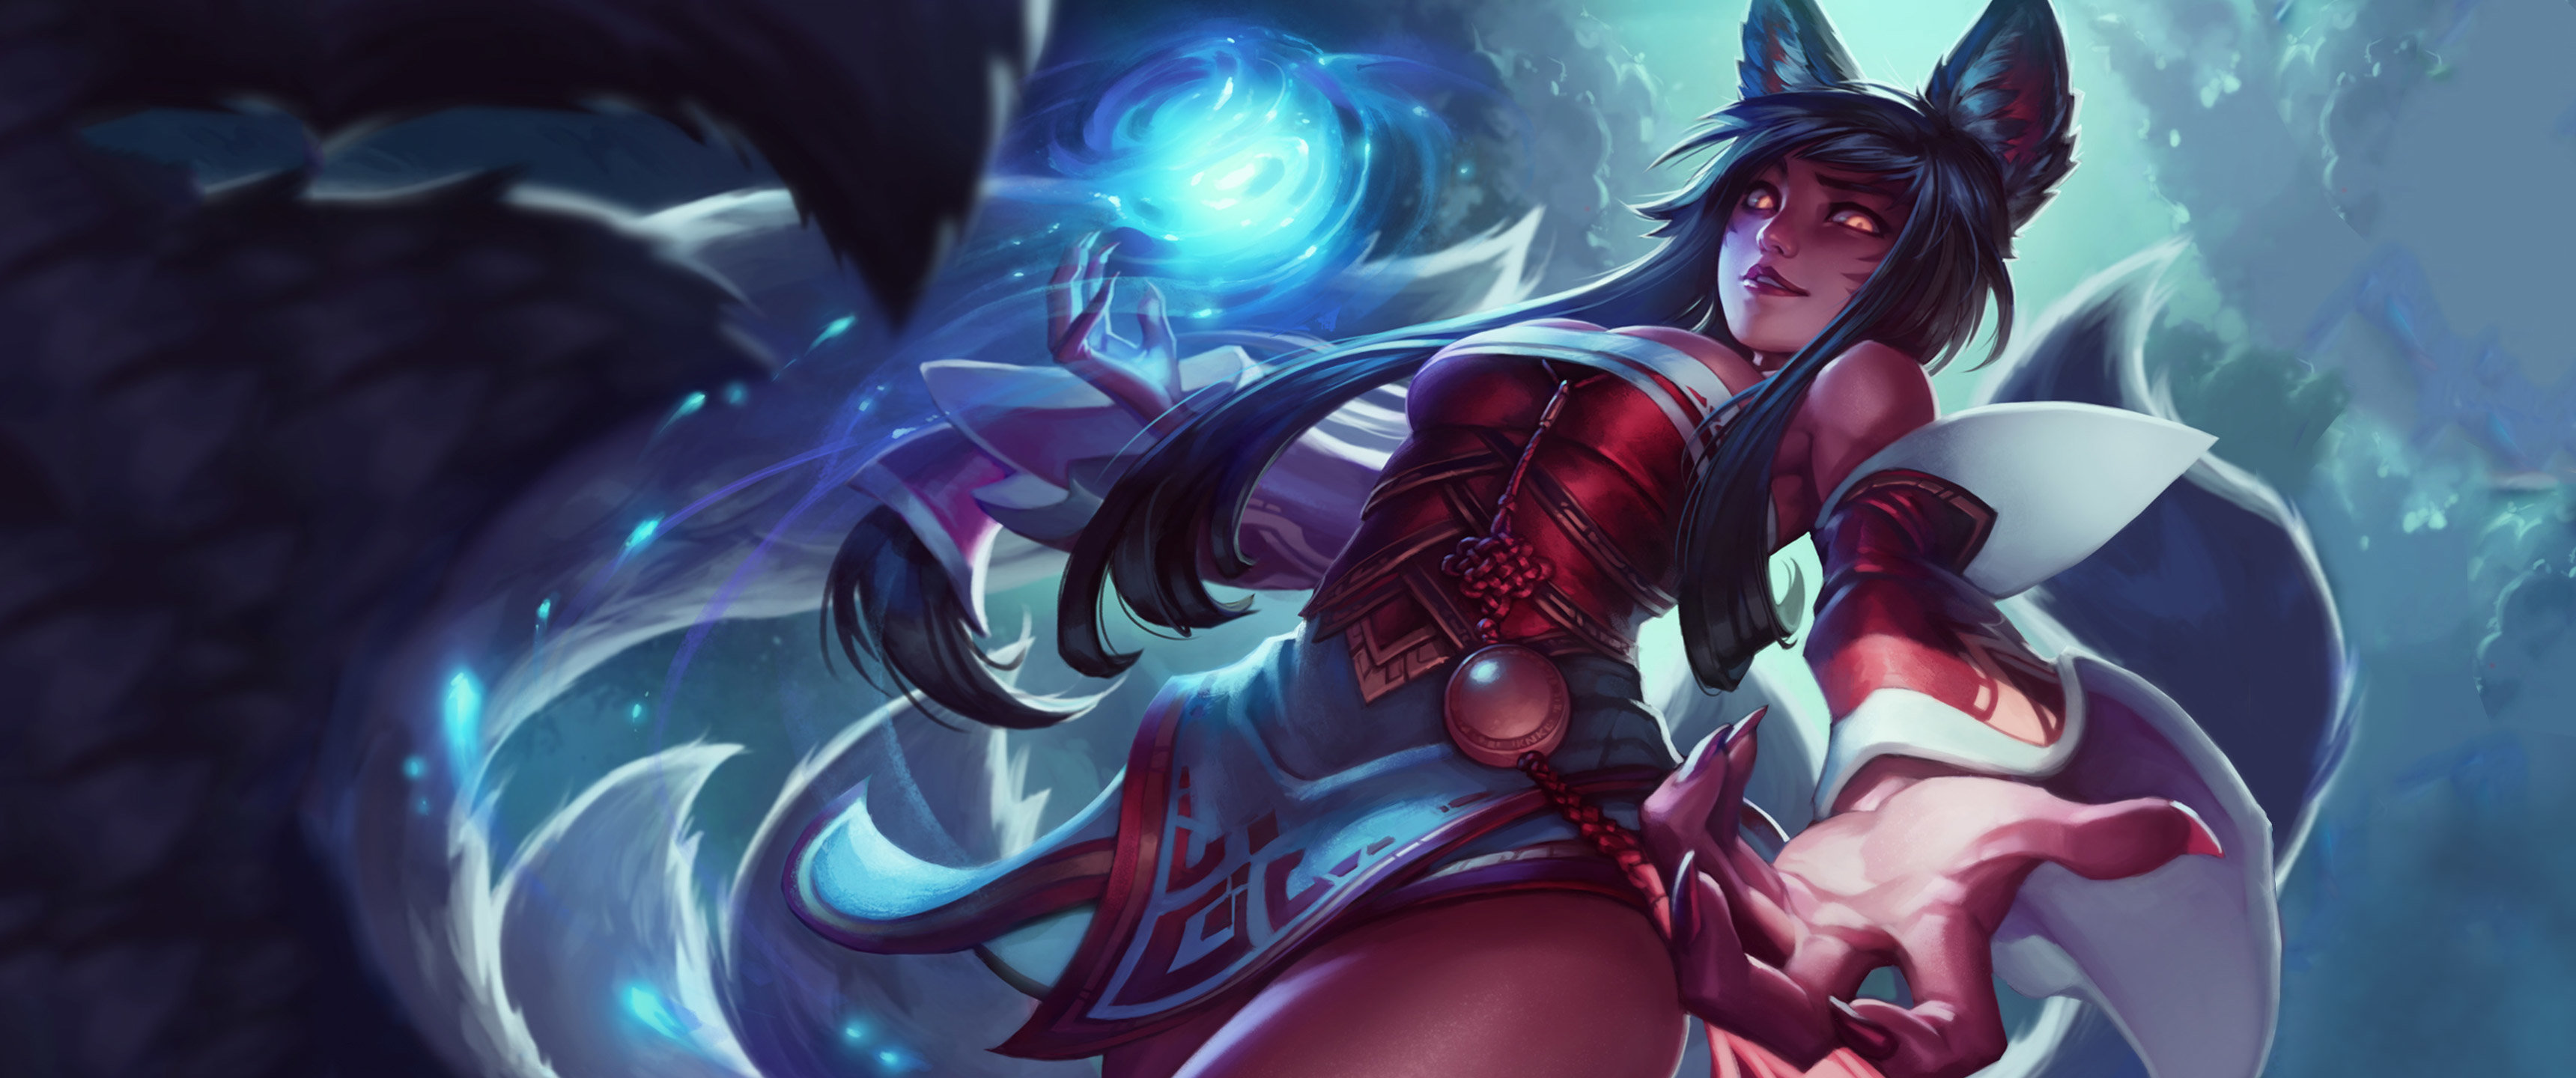 High resolution Ahri (League Of Legends) hd 3440x1440 background ID:171230 for PC